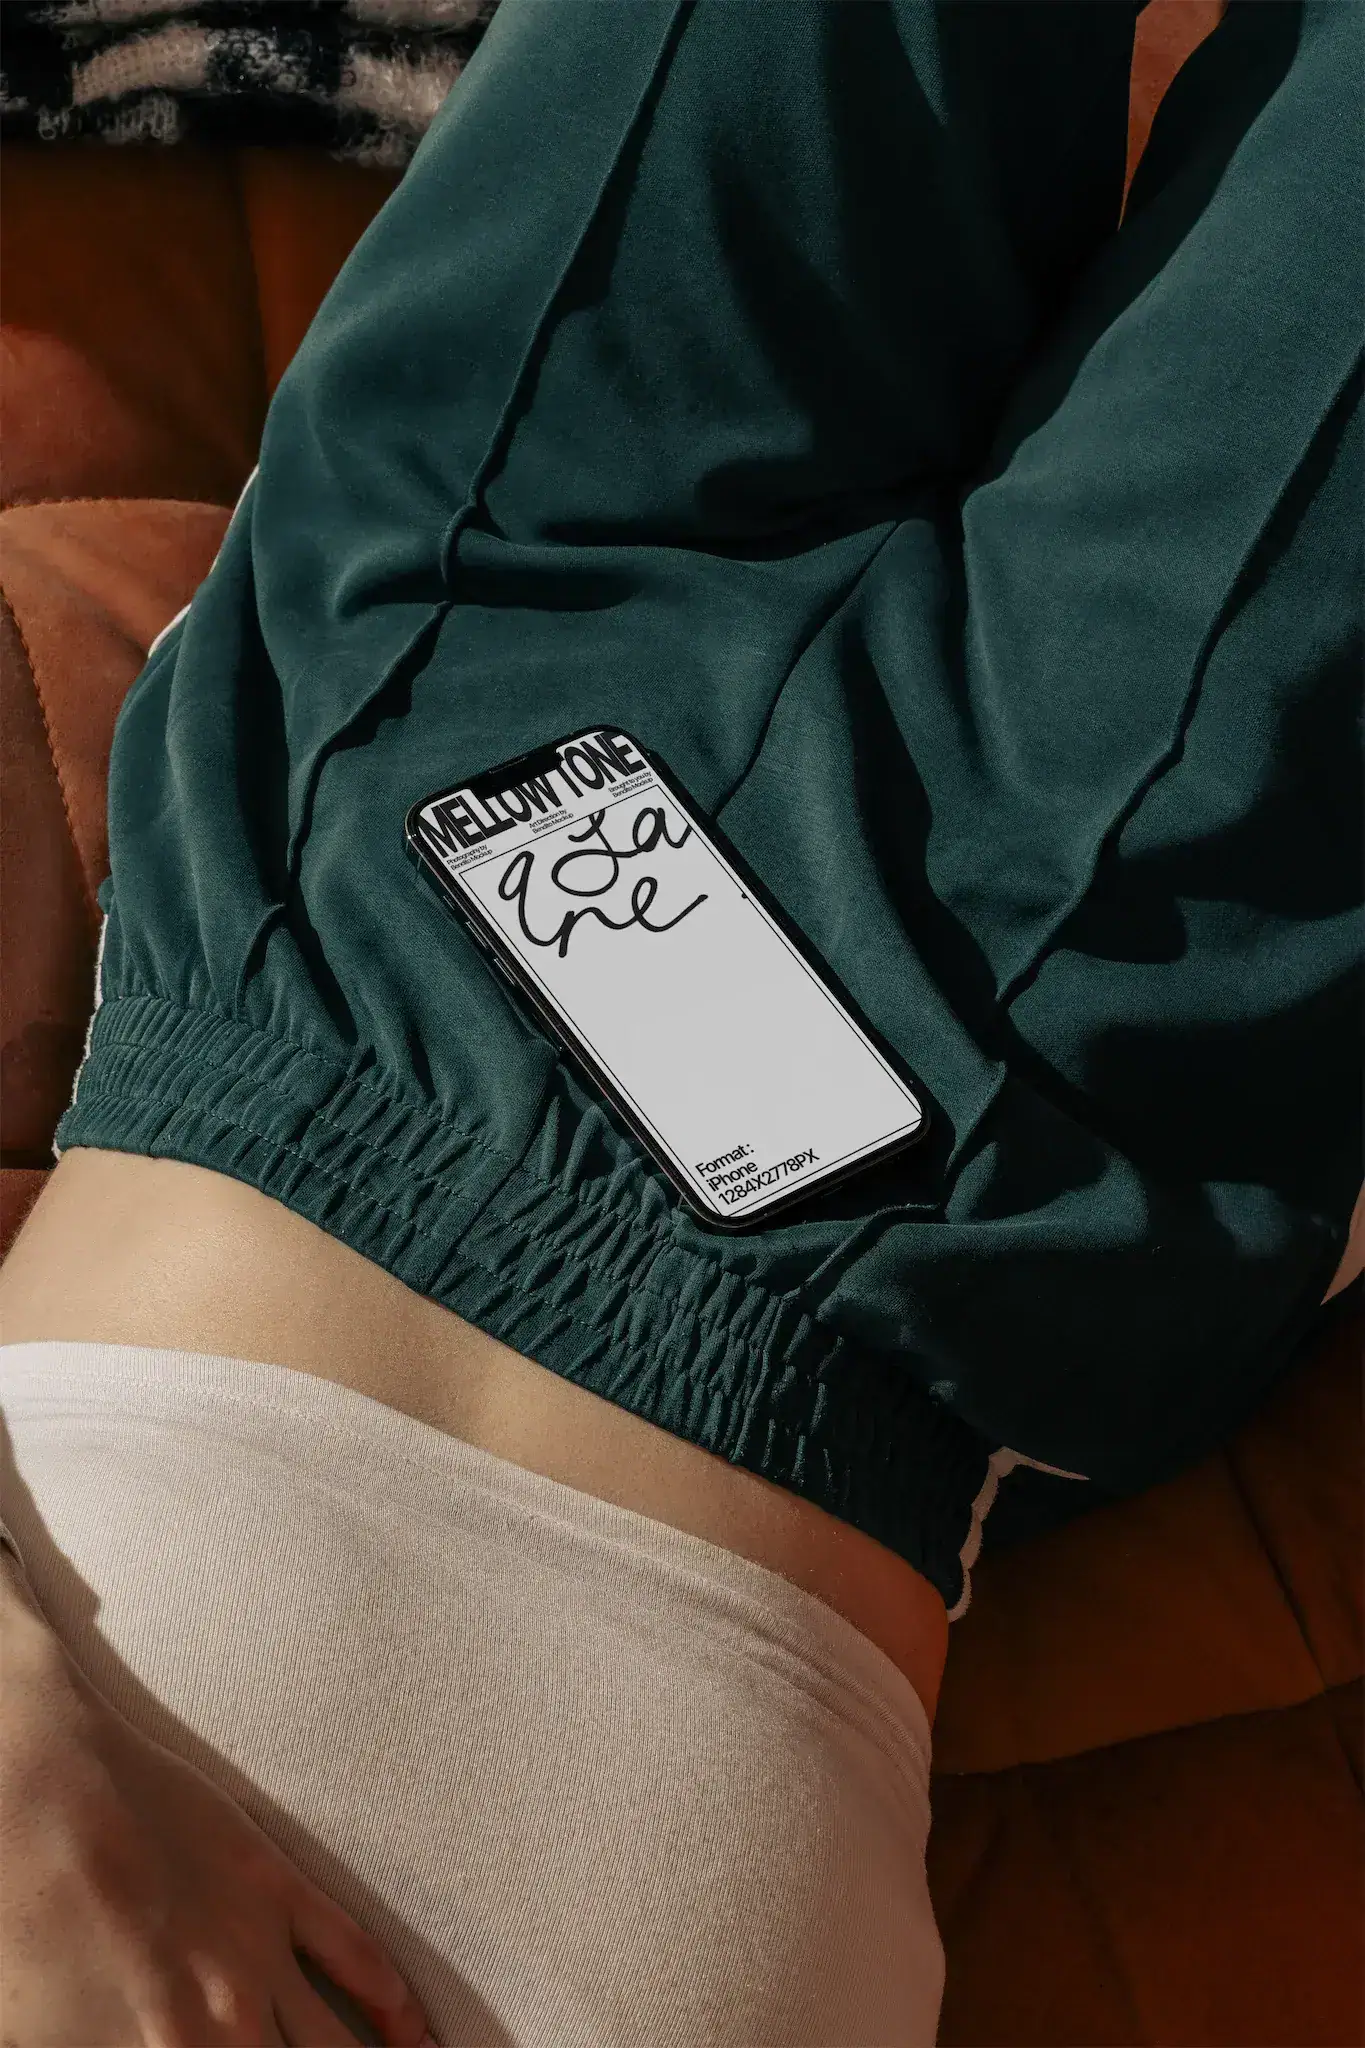 Female body sustaining a premium iPhone mockup. High-quality iPhone mockup being held by human body